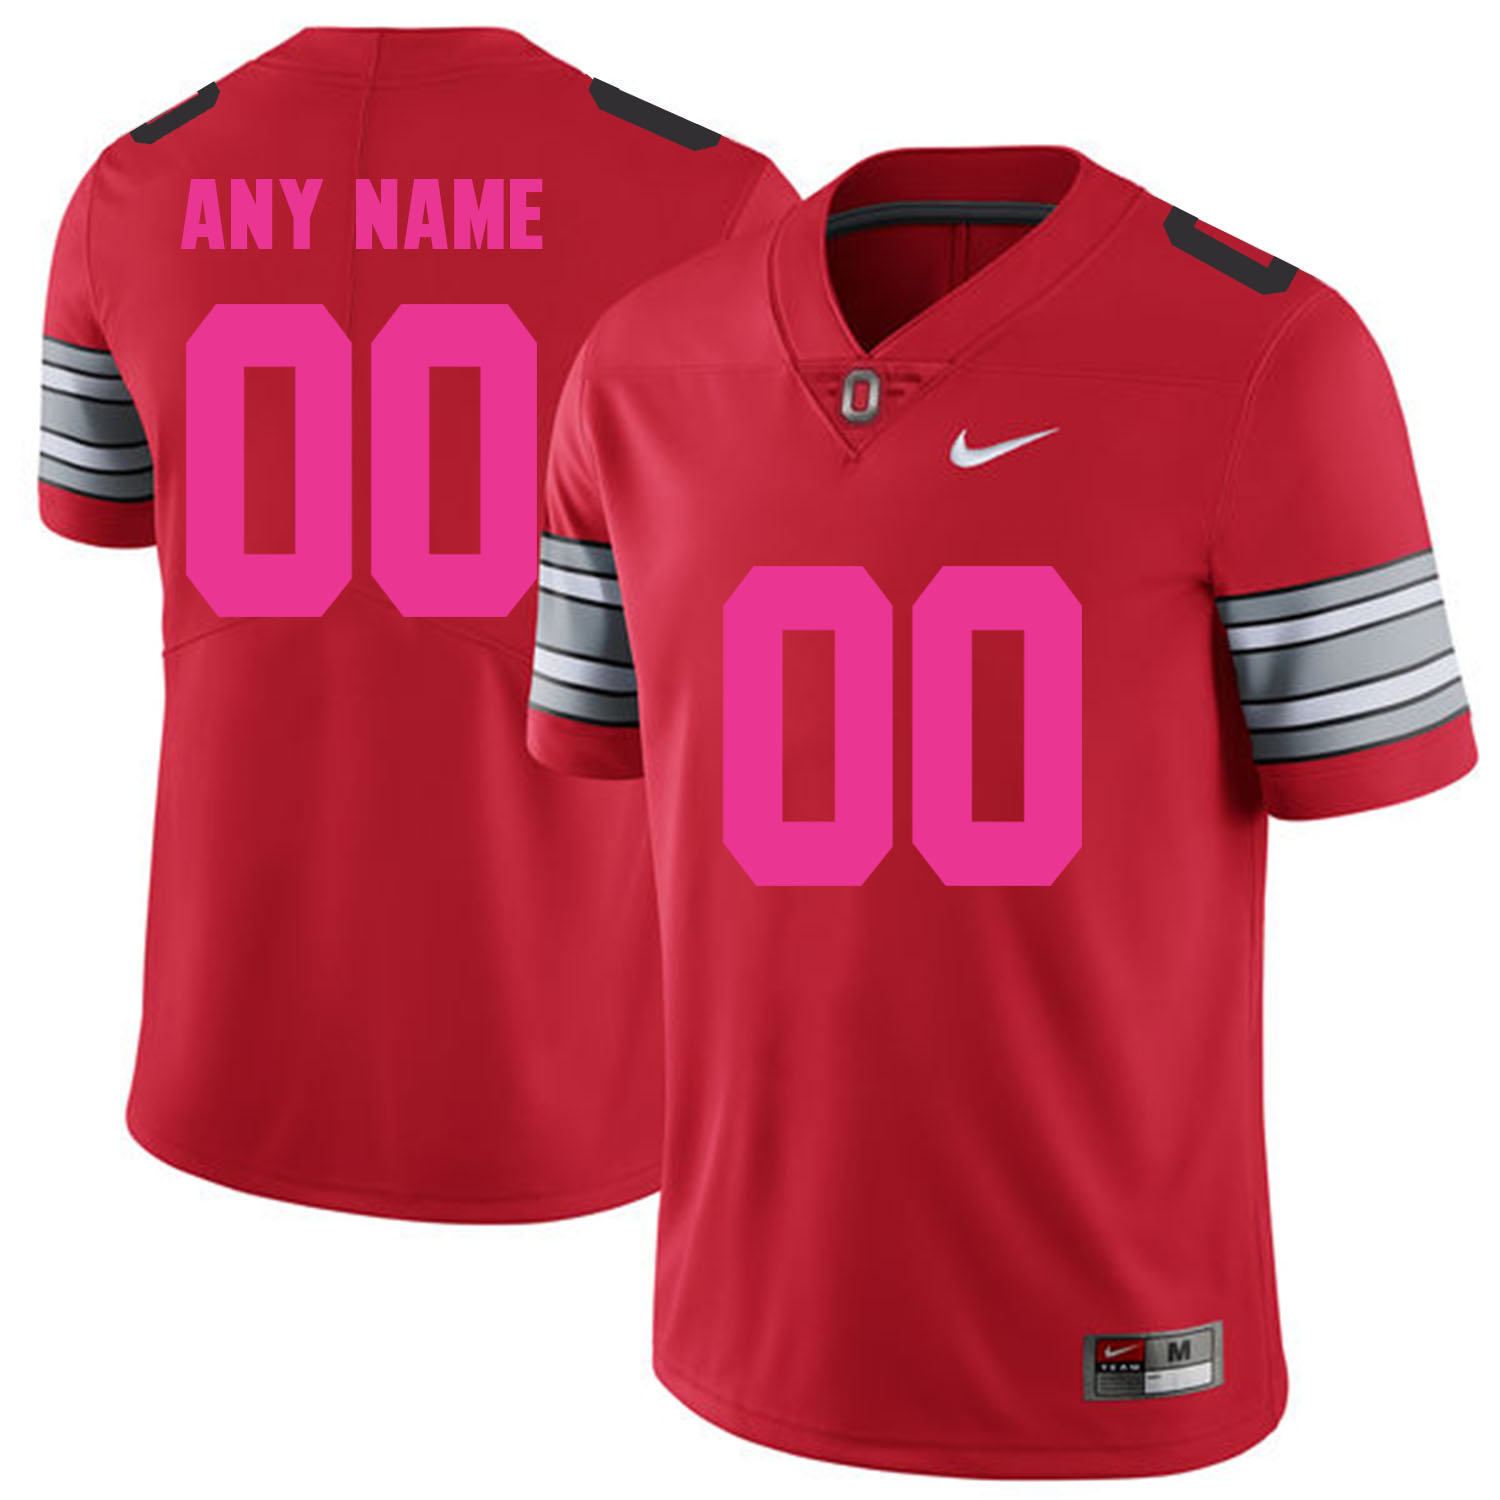 Ohio State Buckeyes Black Spring Red 2018 Breast Cancer Awareness Men's Customized College Football Jersey